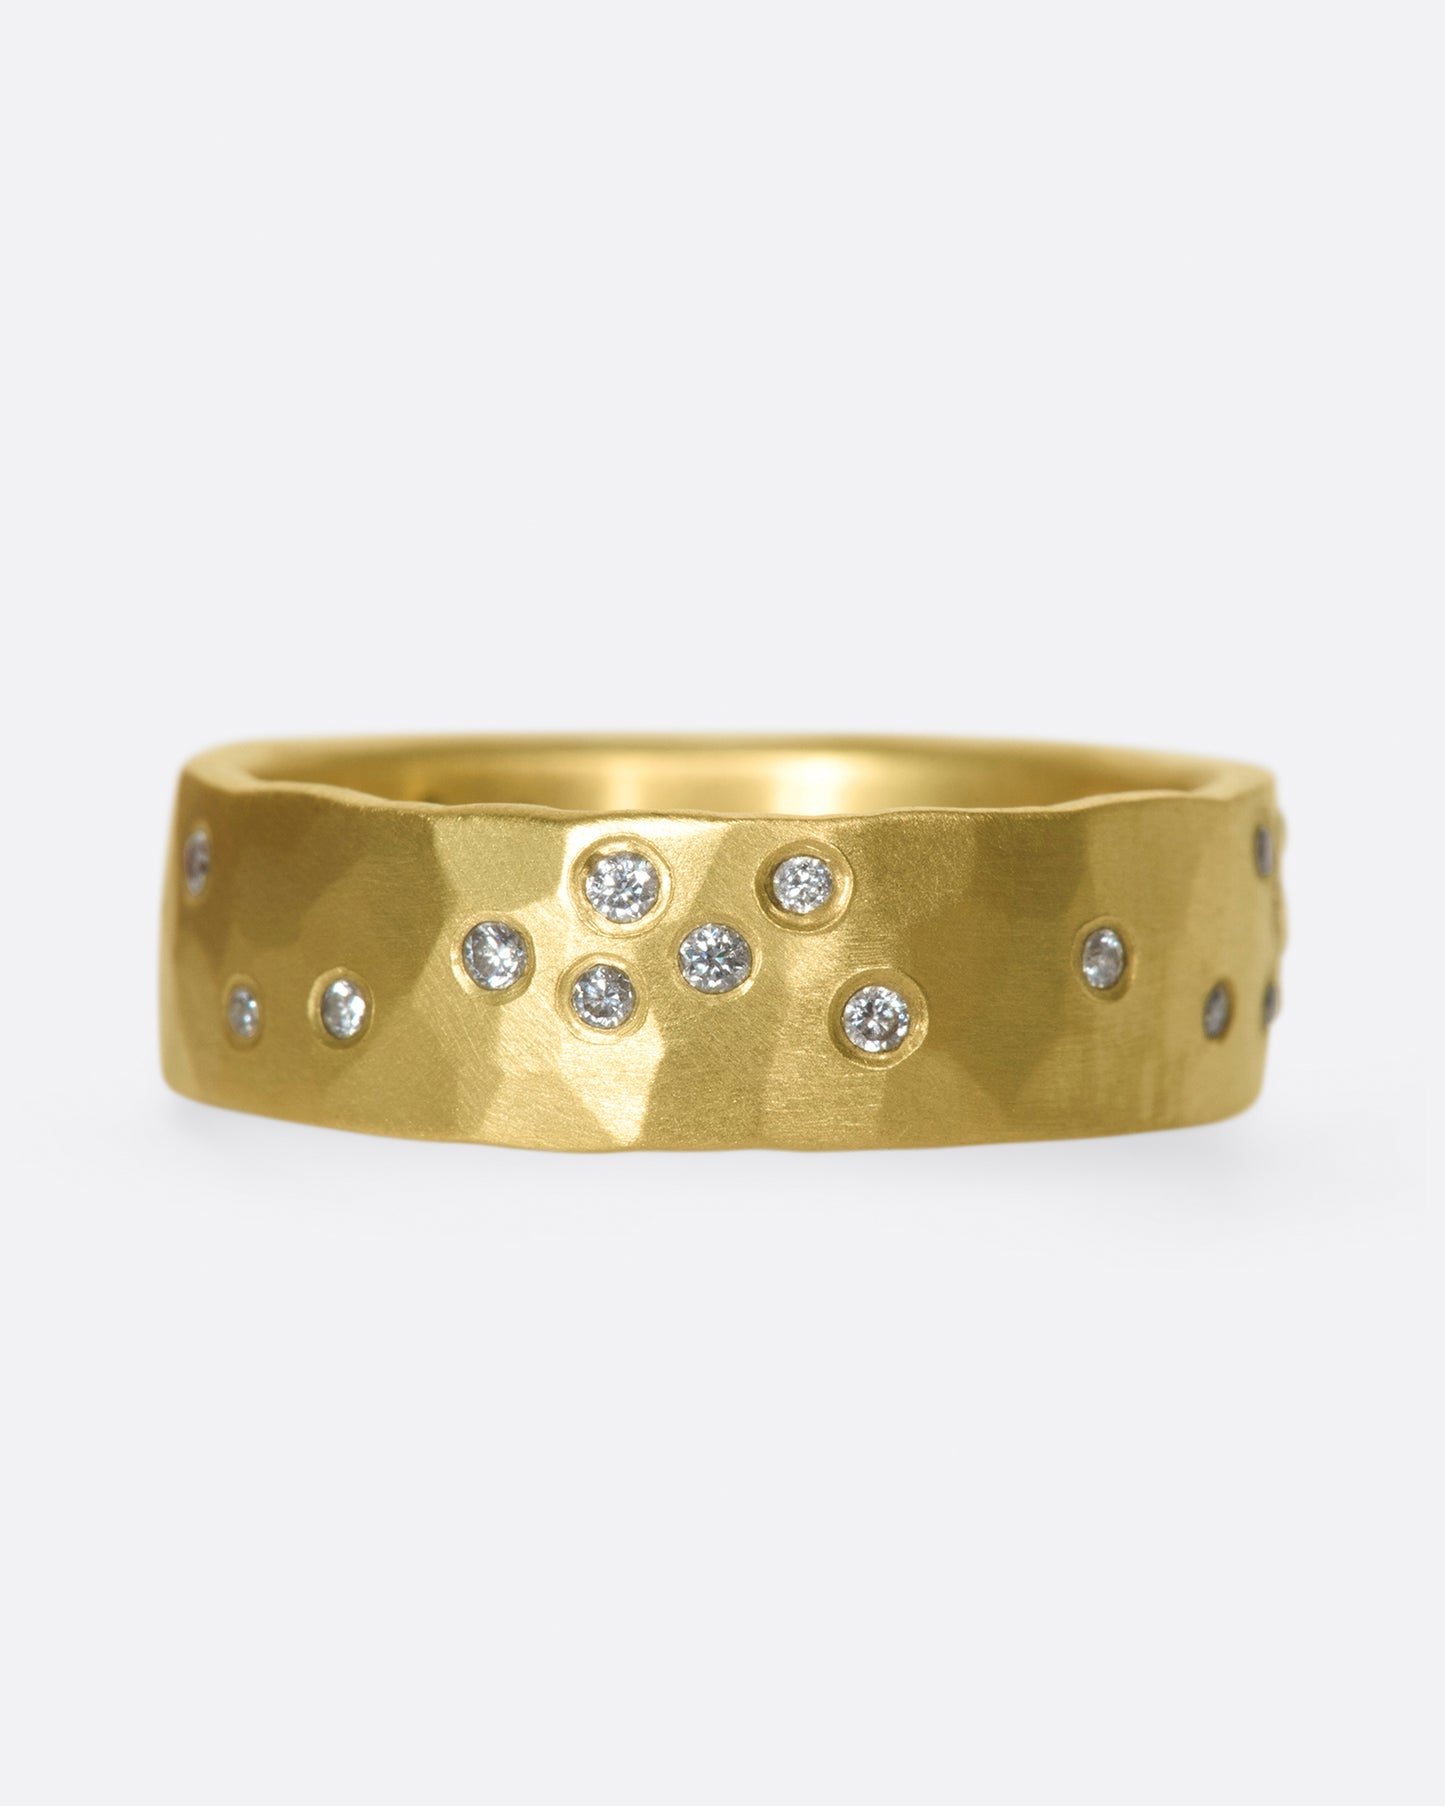 A constellation of thirty sparkling white diamonds set on a wide, hammered, matte gold band.